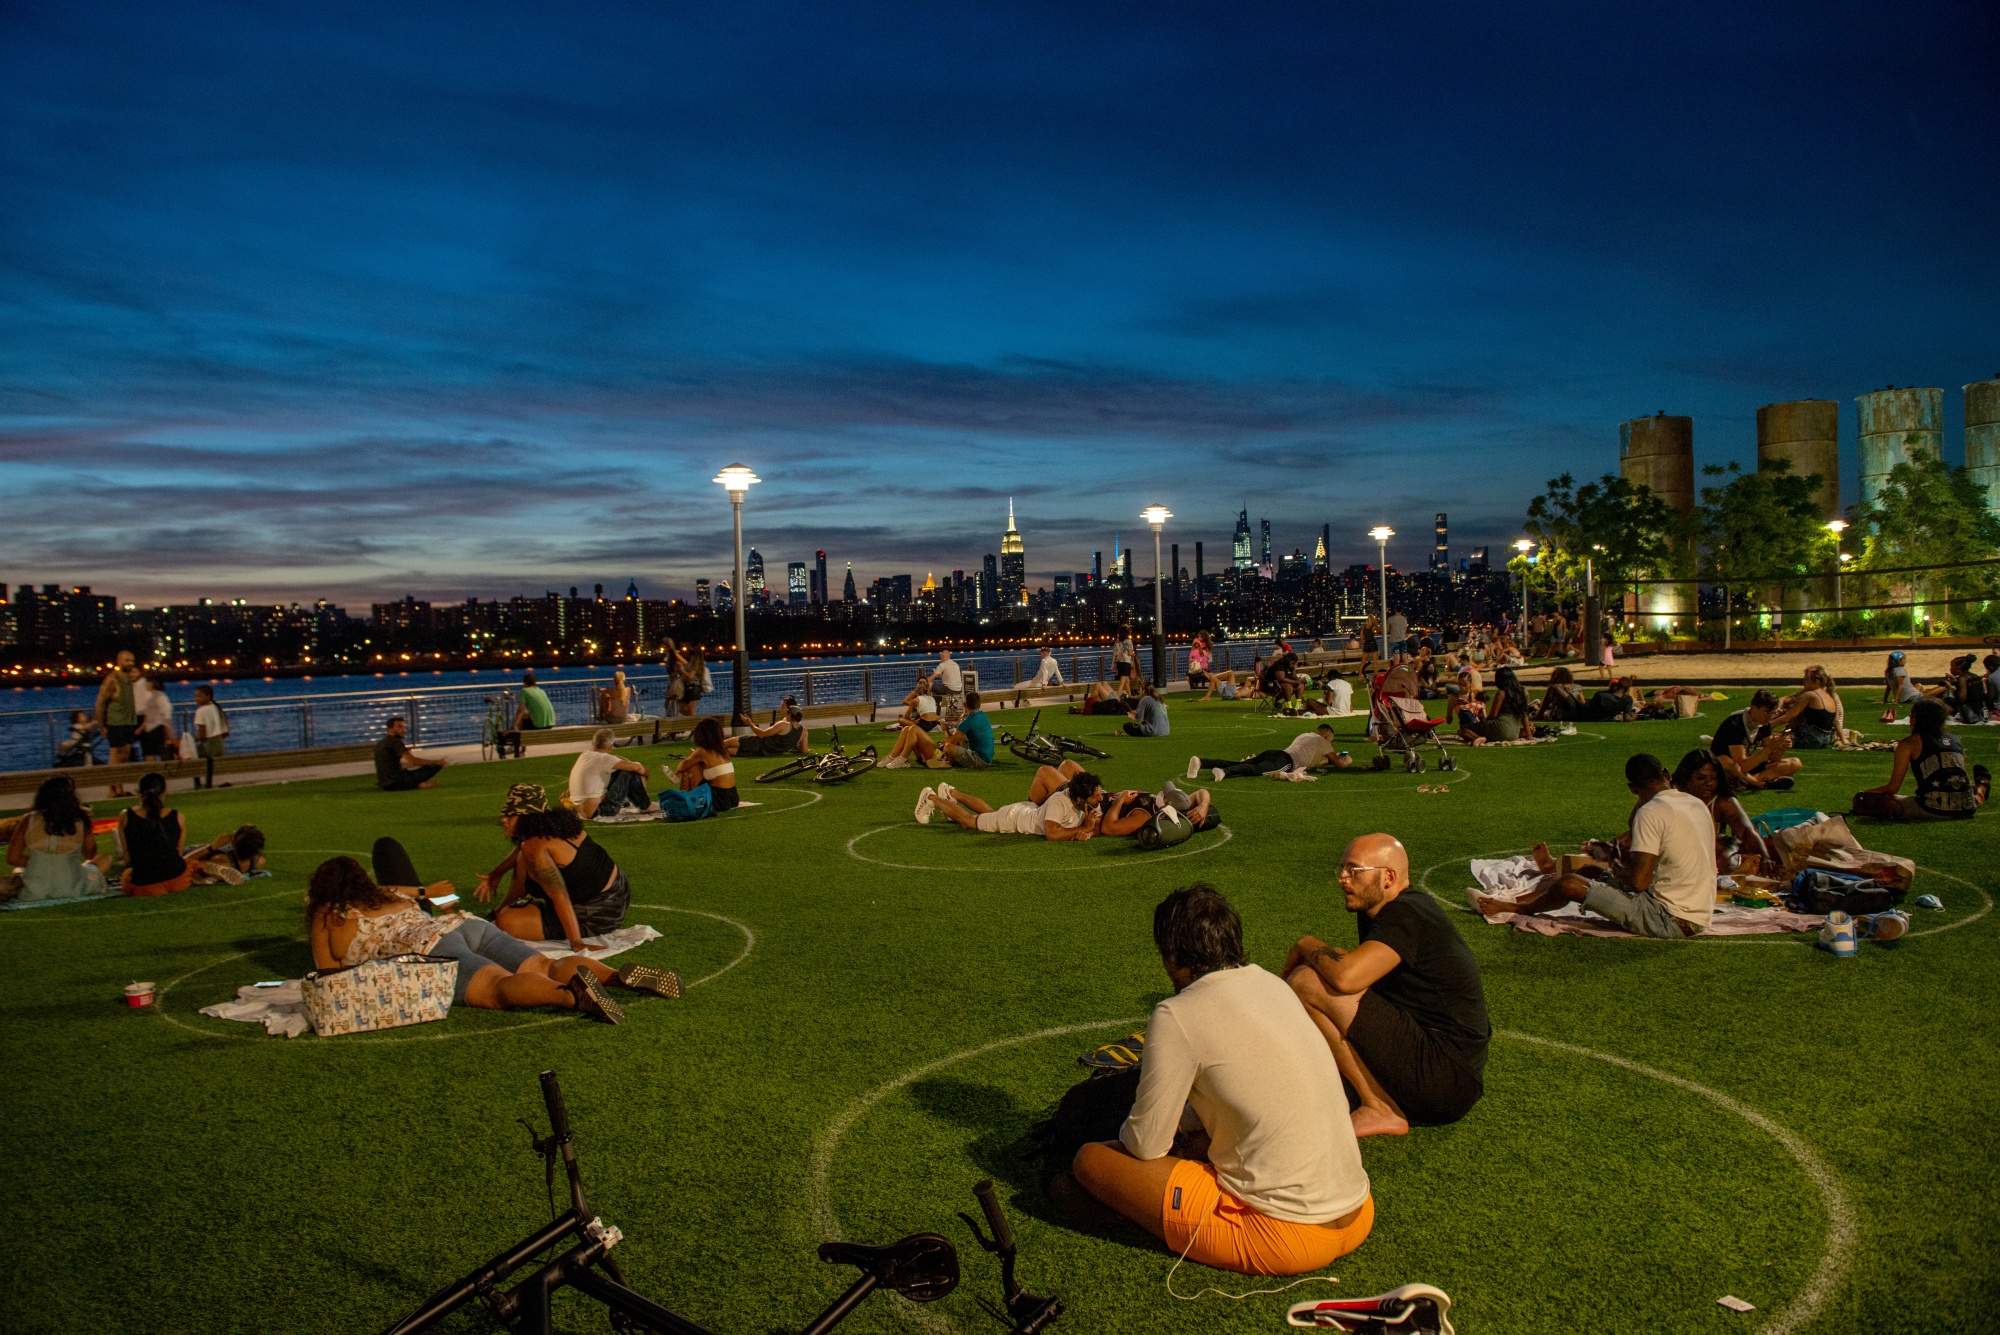 People sit in circles to observe social distancing in Domino Park in Brooklyn,&nbsp;with a view of the Manhattan skyline,&nbsp;on July 26, 2020.